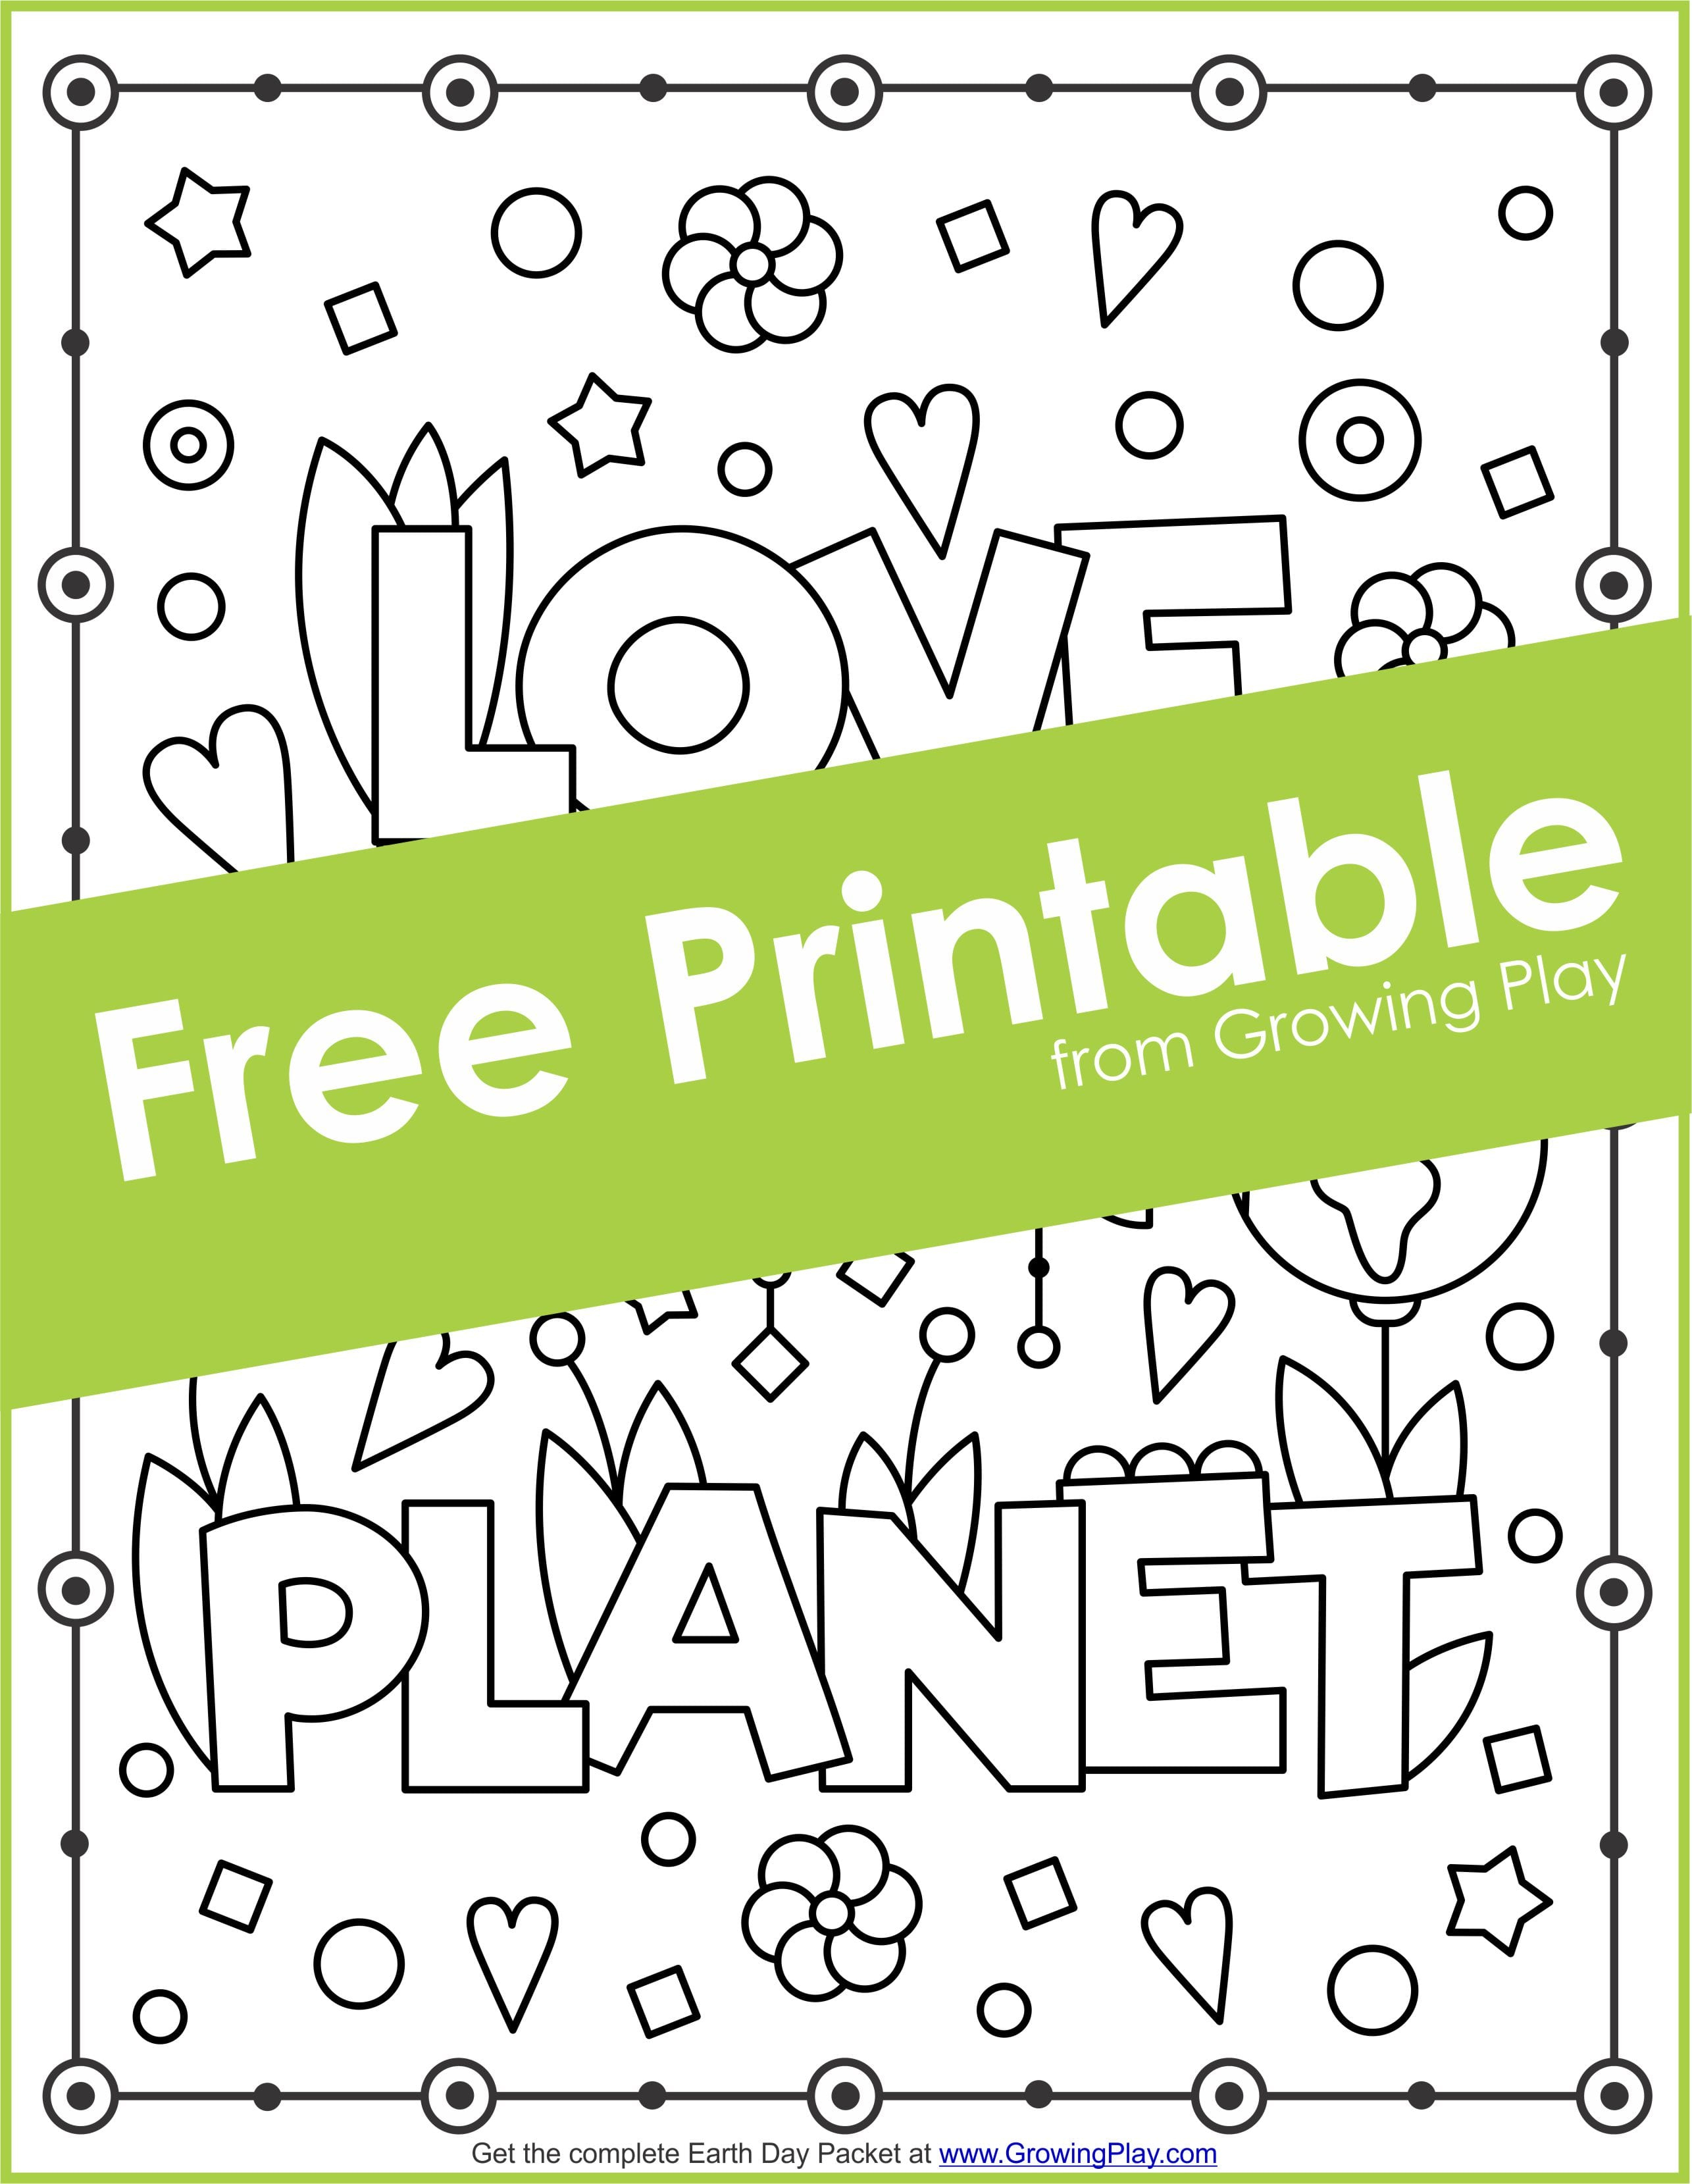 Earth Day Puzzle Packet - Your Therapy Source - Printable Puzzle Packet